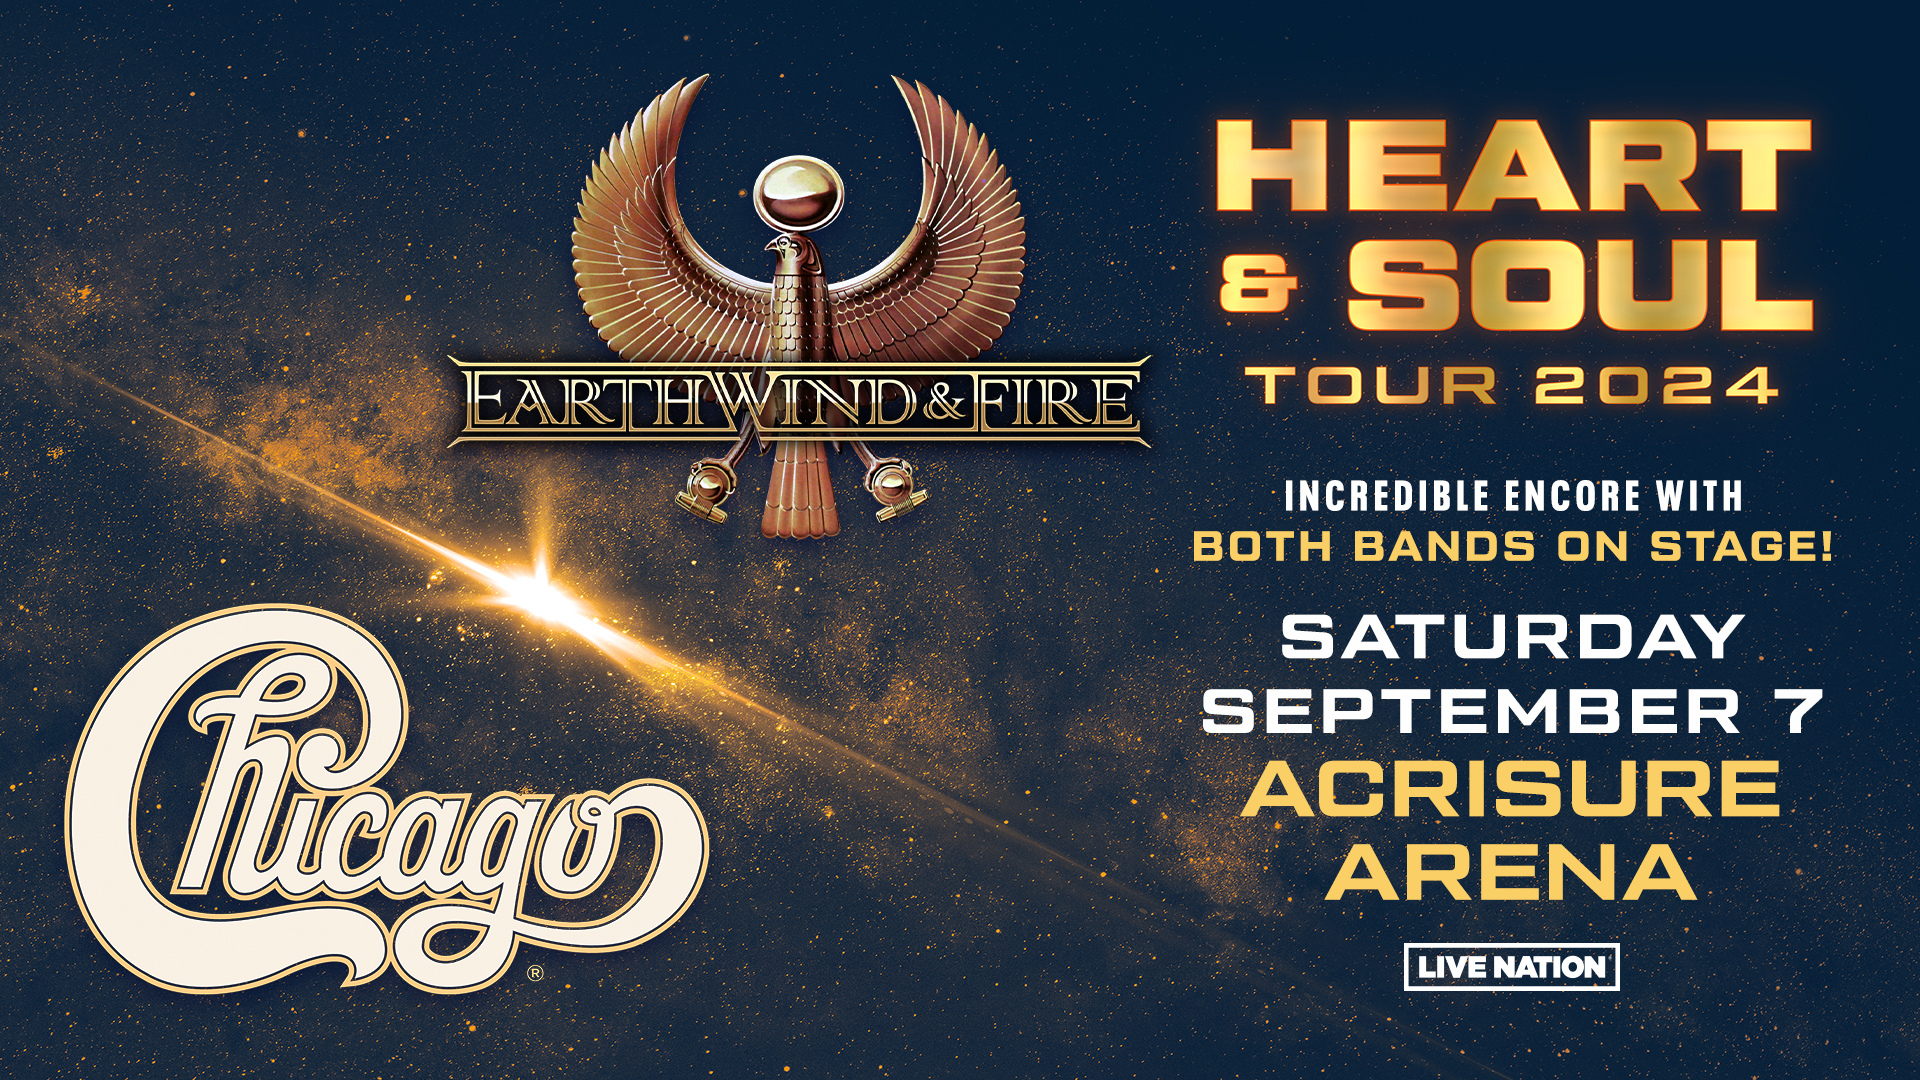 Chicago + Earth, Wind & Fire